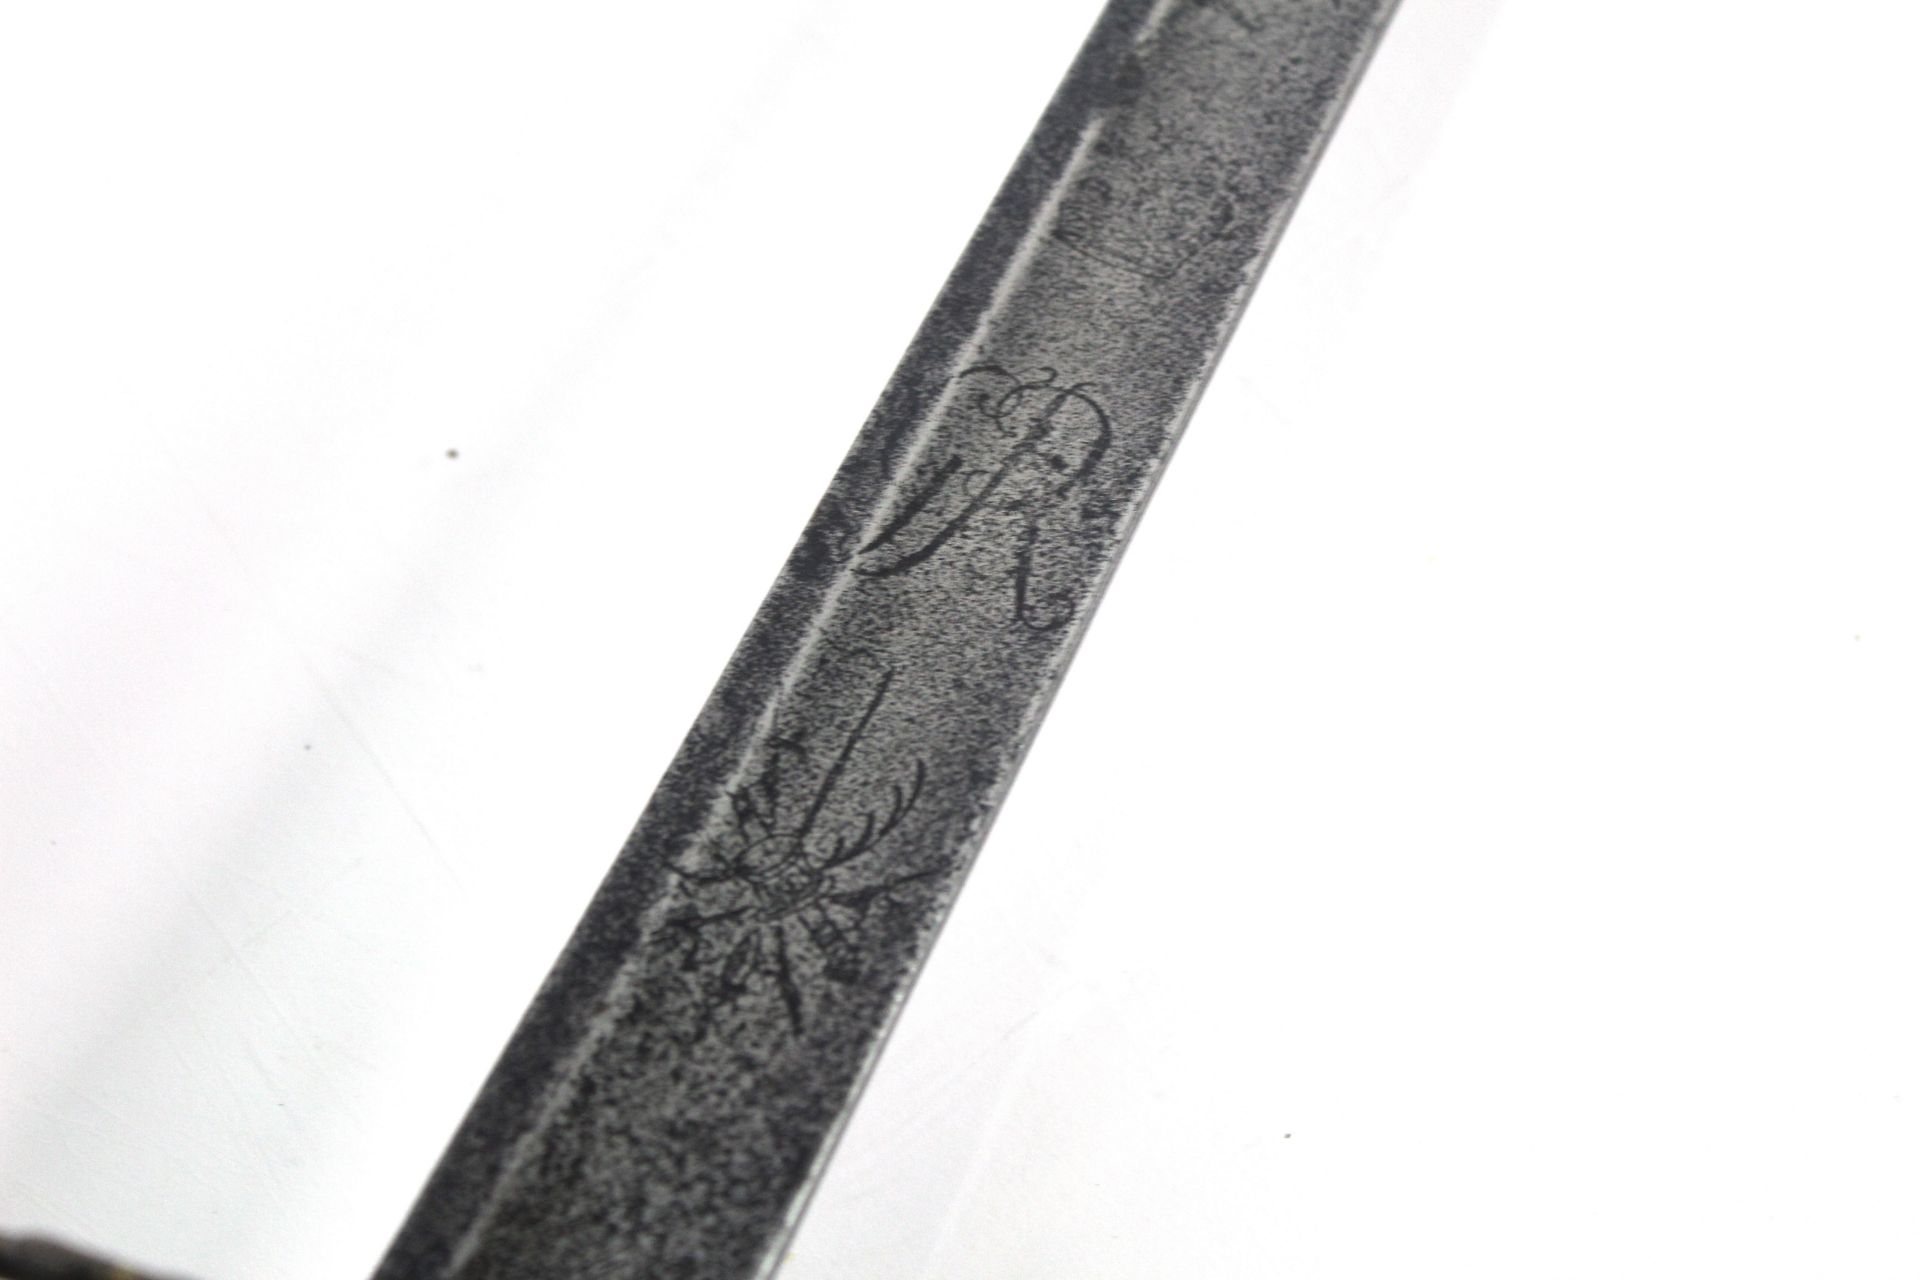 A British heavy cavalry officers sword circa 1780, - Image 11 of 13